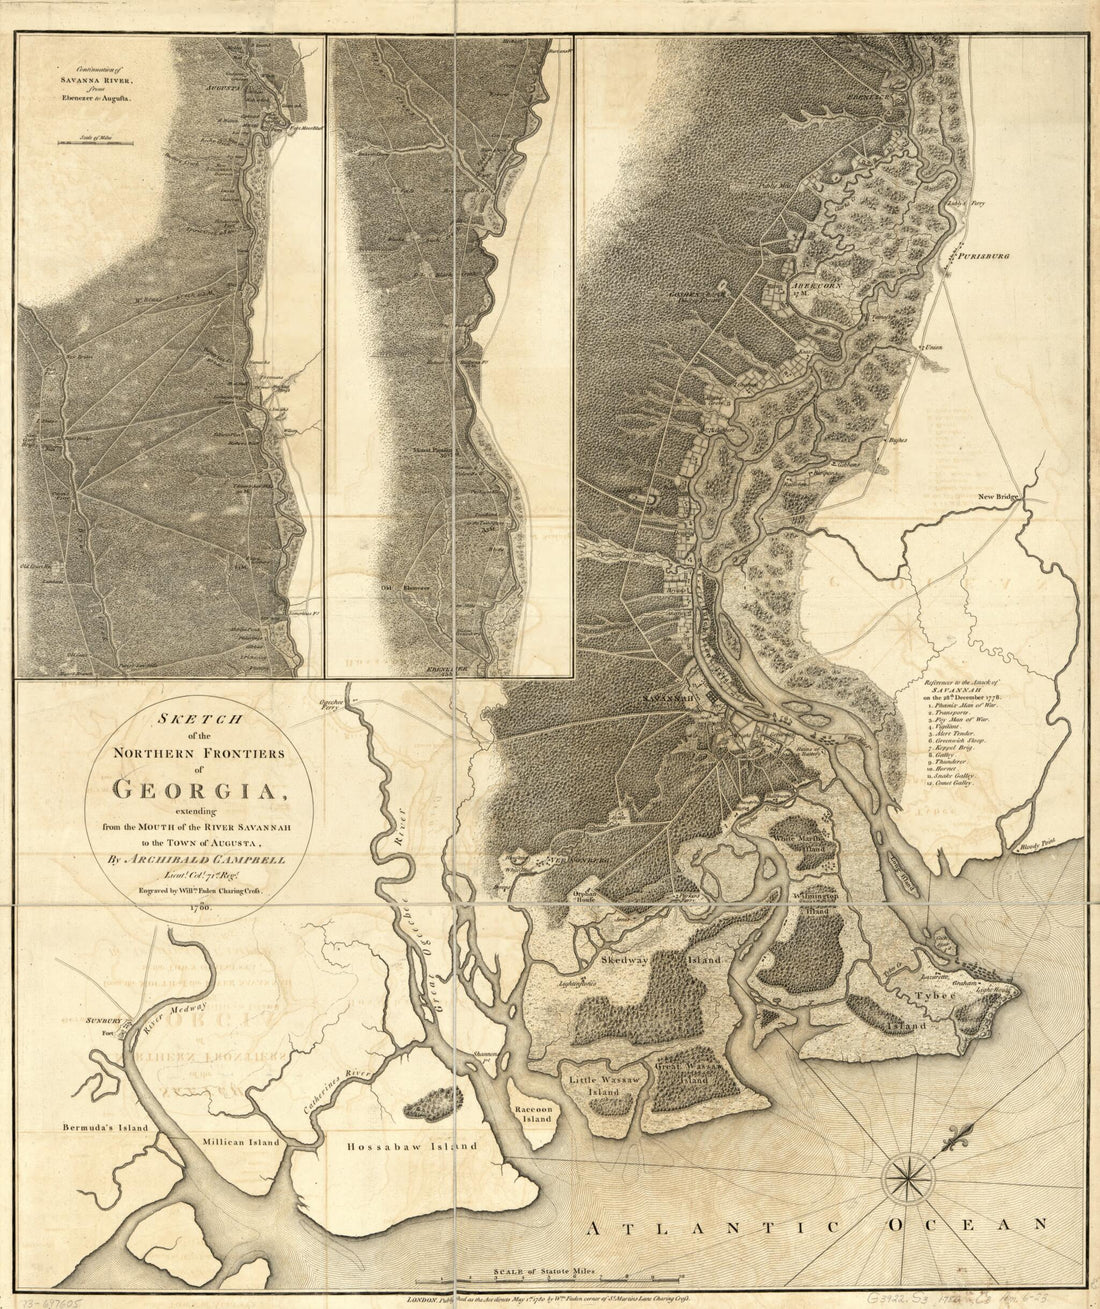 This old map of Sketch of the Northern Frontiers of Georgia, Extending from the Mouth of the River Savannah to the Town of Augusta from 1780 was created by Archibald Campbell, William Faden in 1780